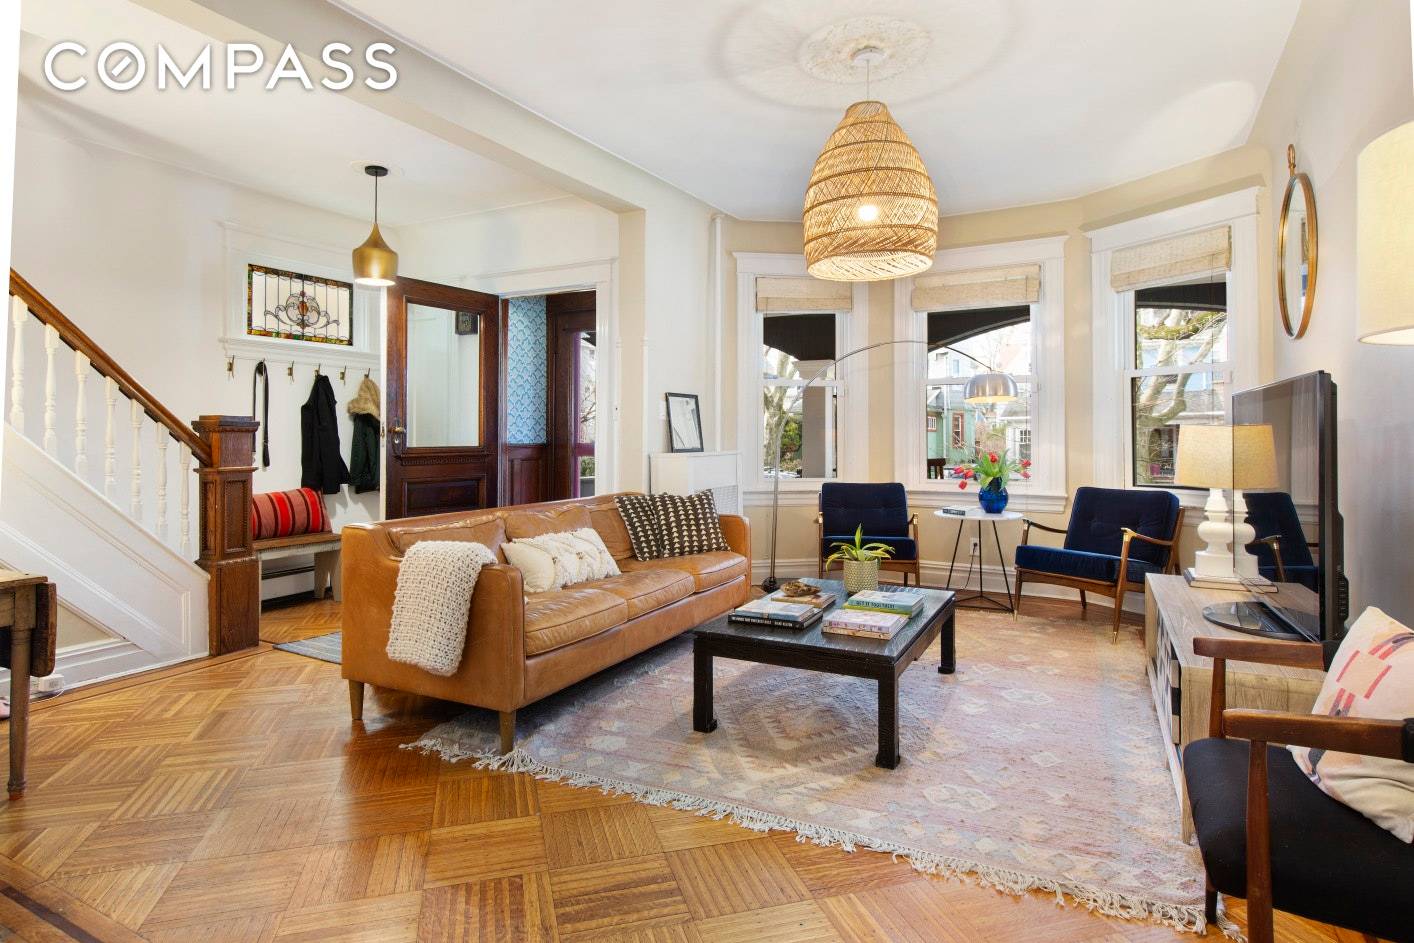 This exceedingly charming 7 bedroom, 2.